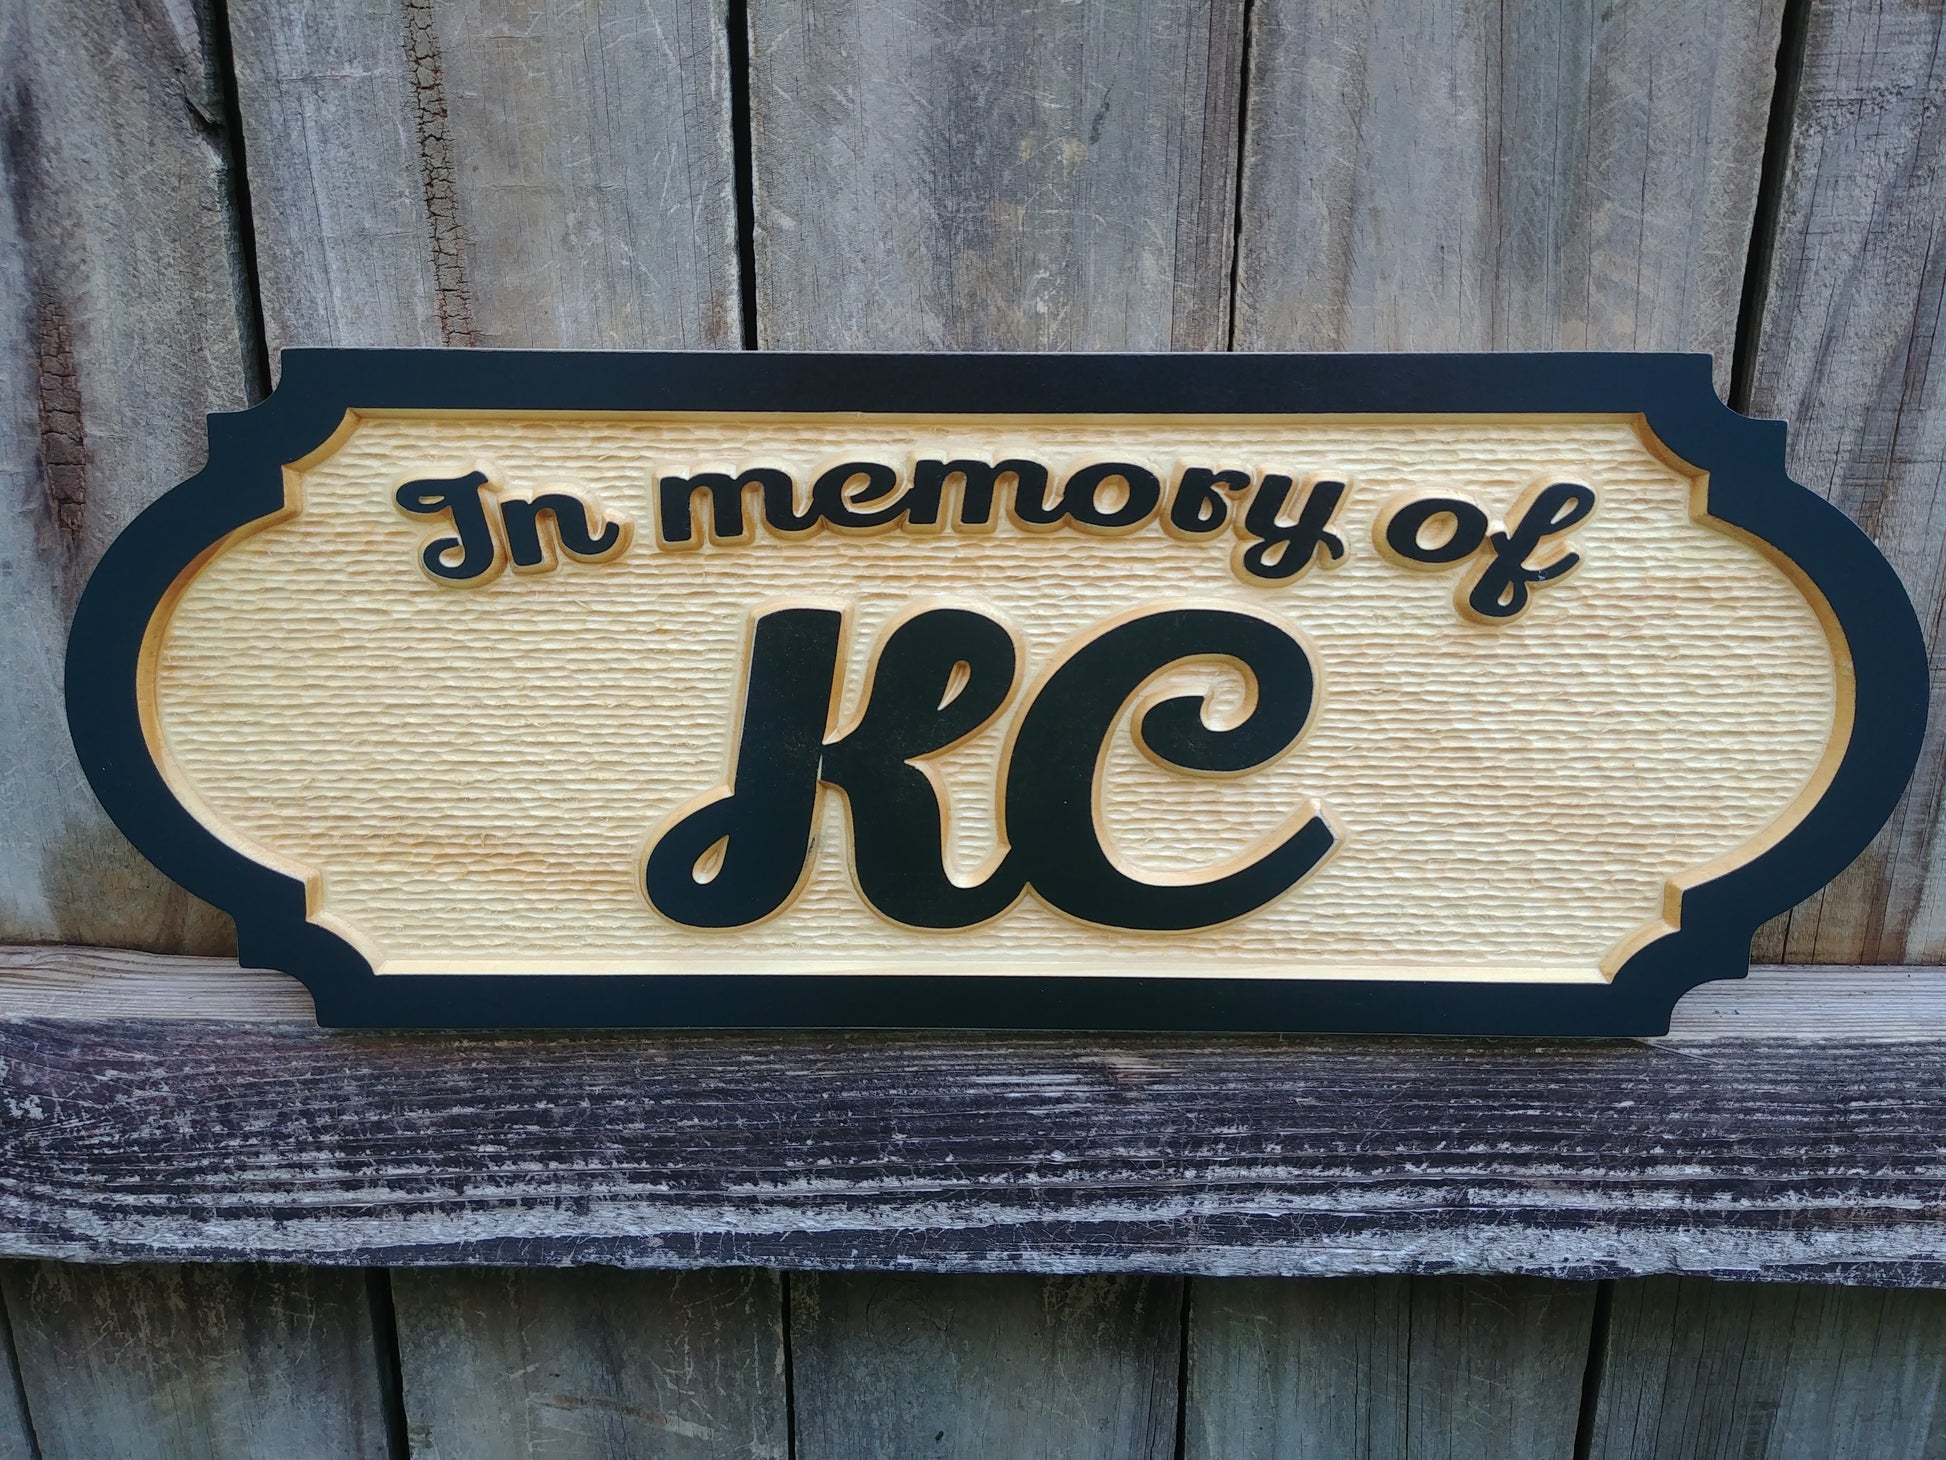 Crossing the Rainbow Bridge Pet loss memorial name sign custom wood carved gift for the pet owner. Made in the USA.